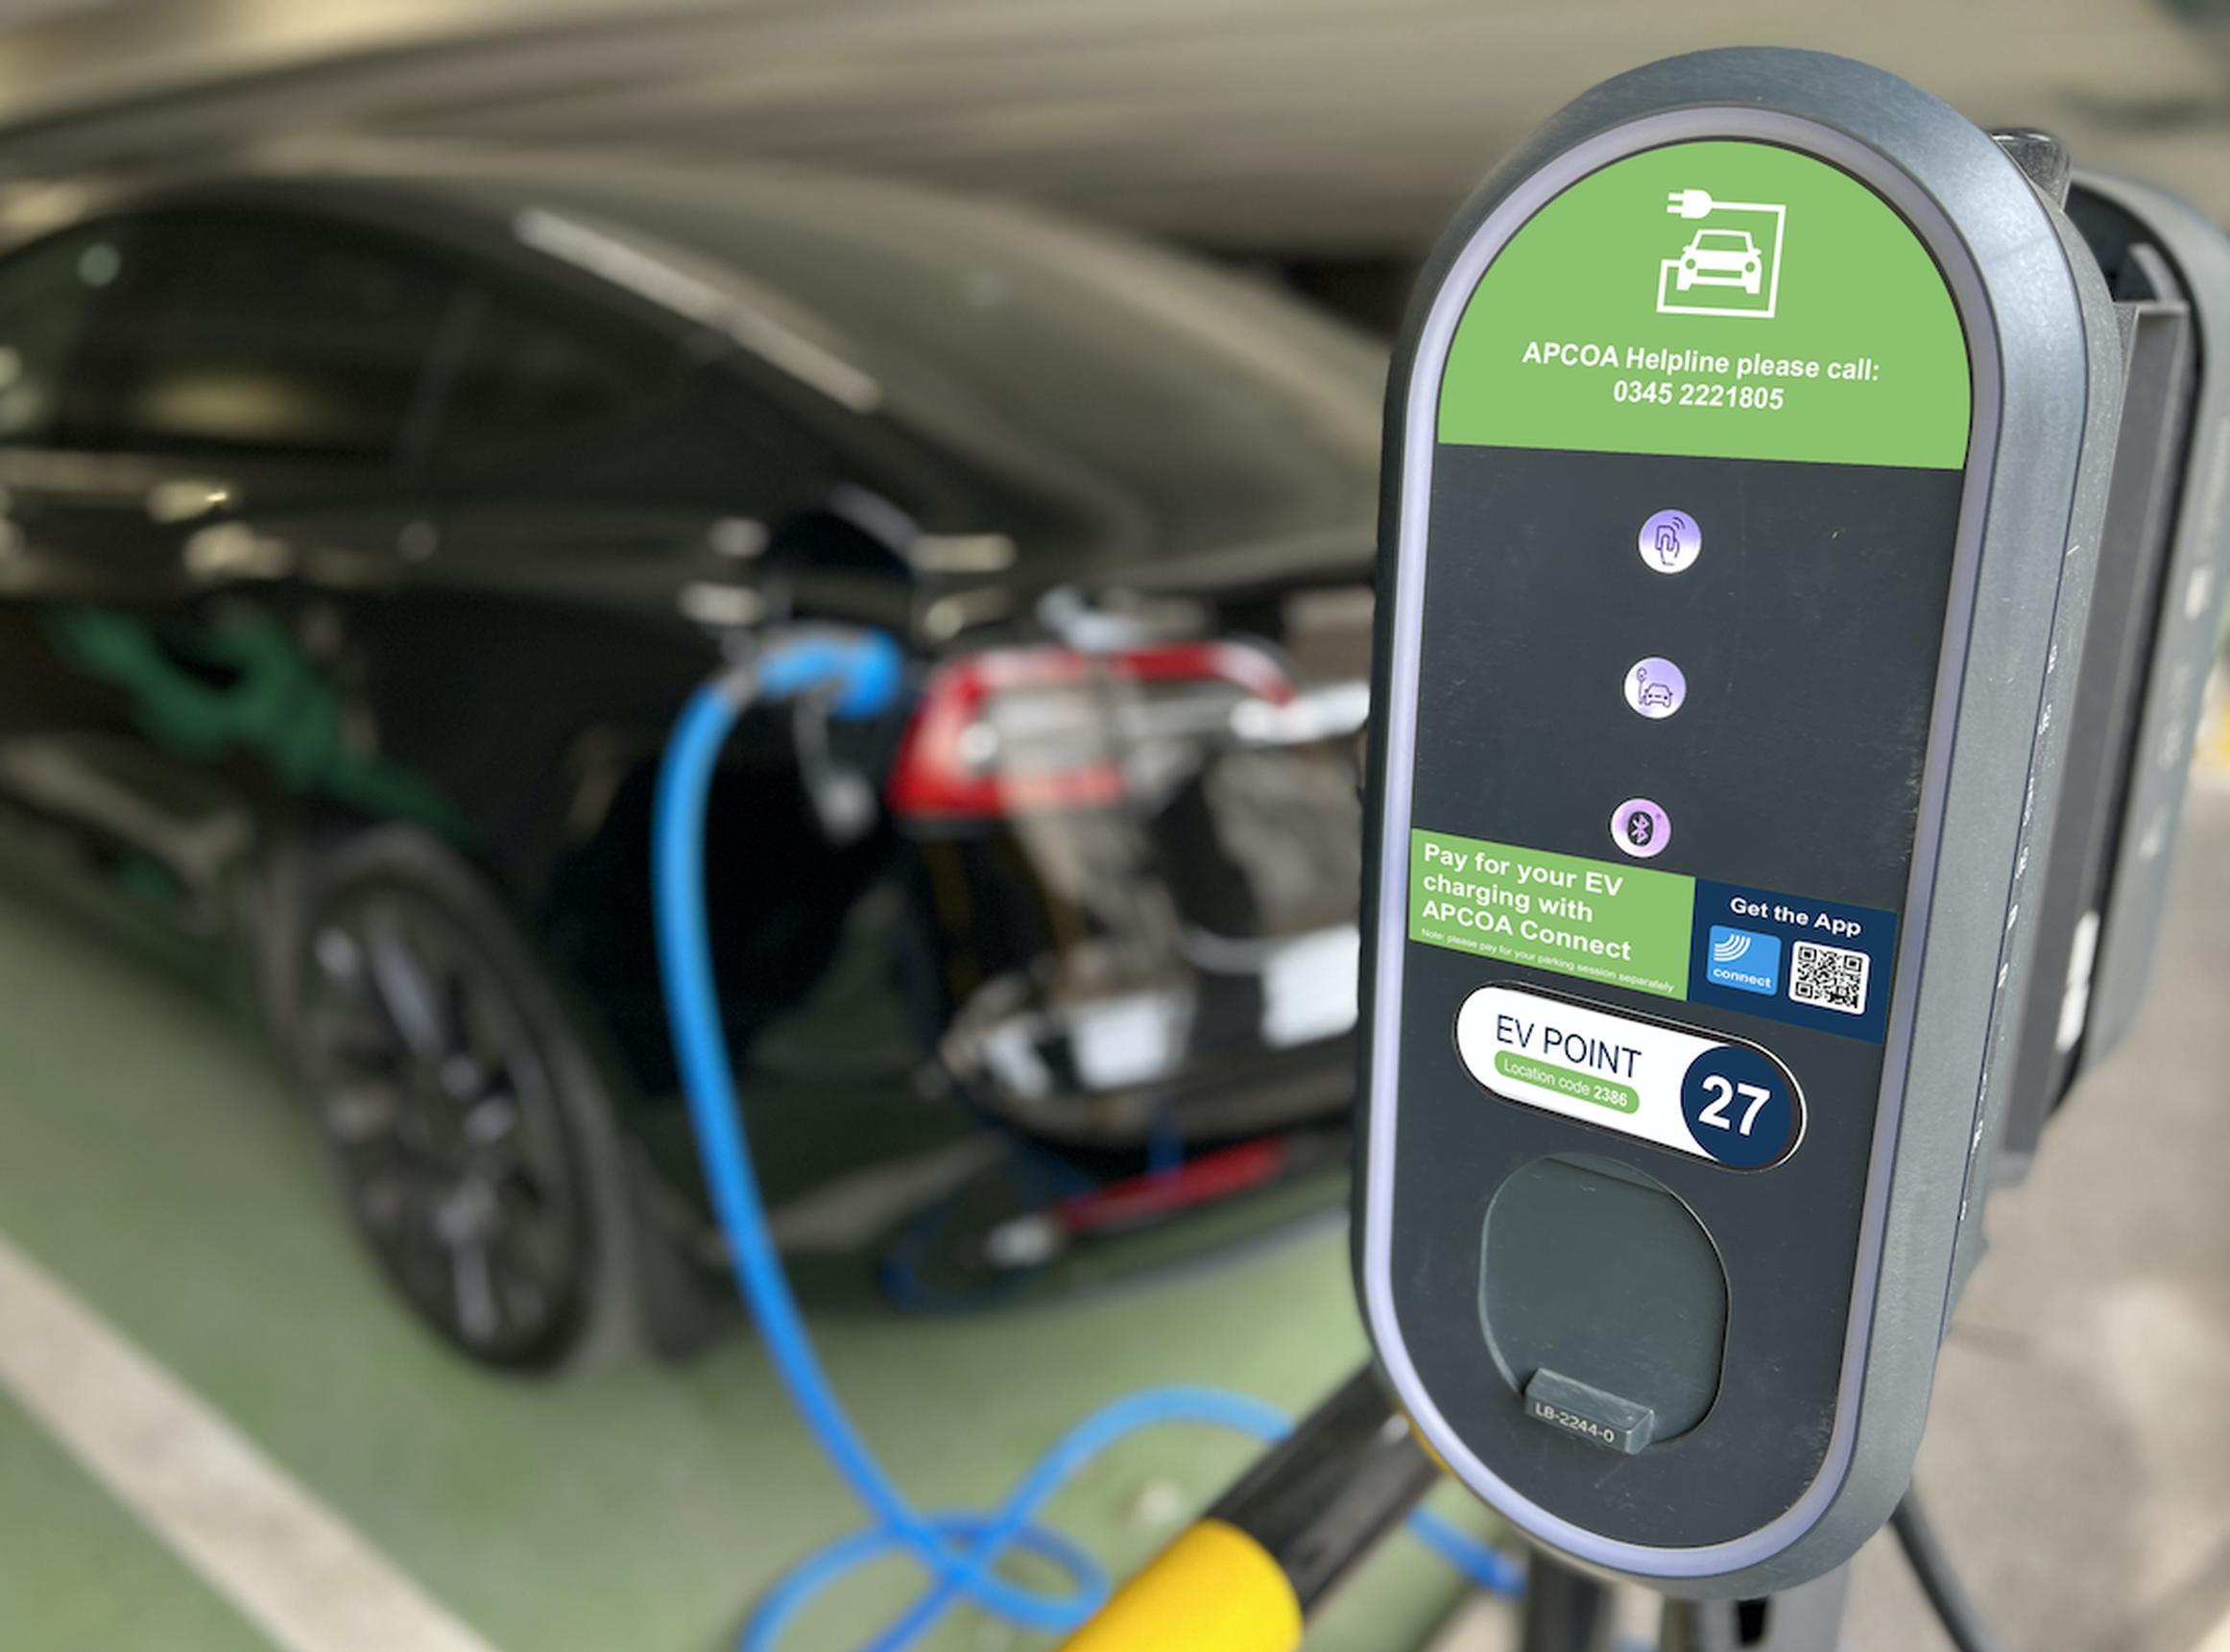 APCOA provides live chargepoint data to Zapmap